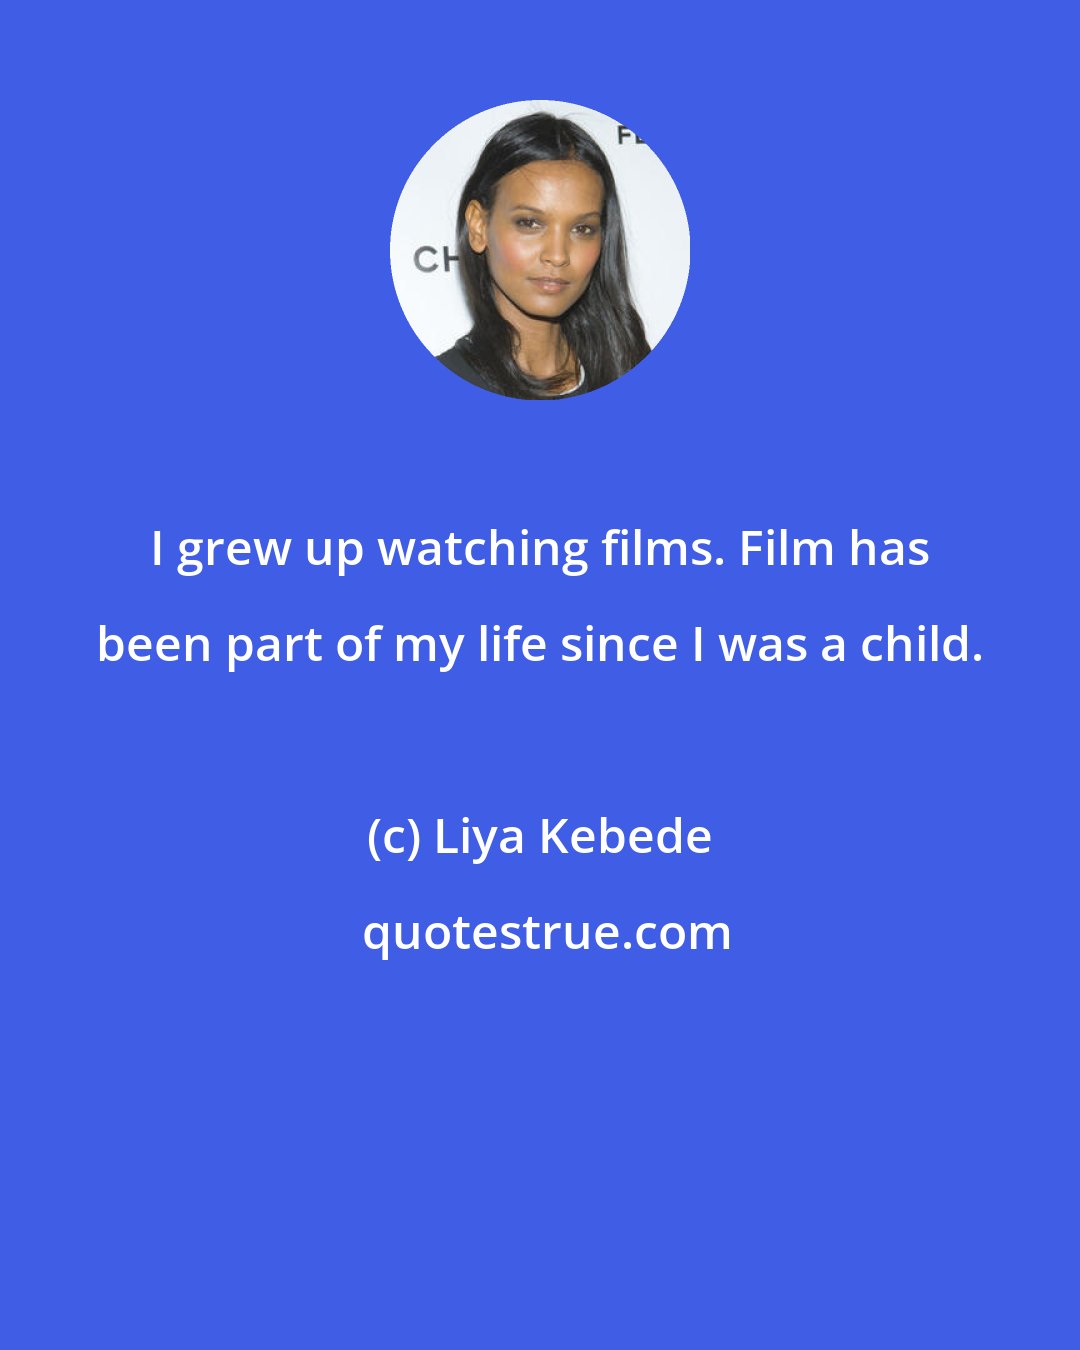 Liya Kebede: I grew up watching films. Film has been part of my life since I was a child.